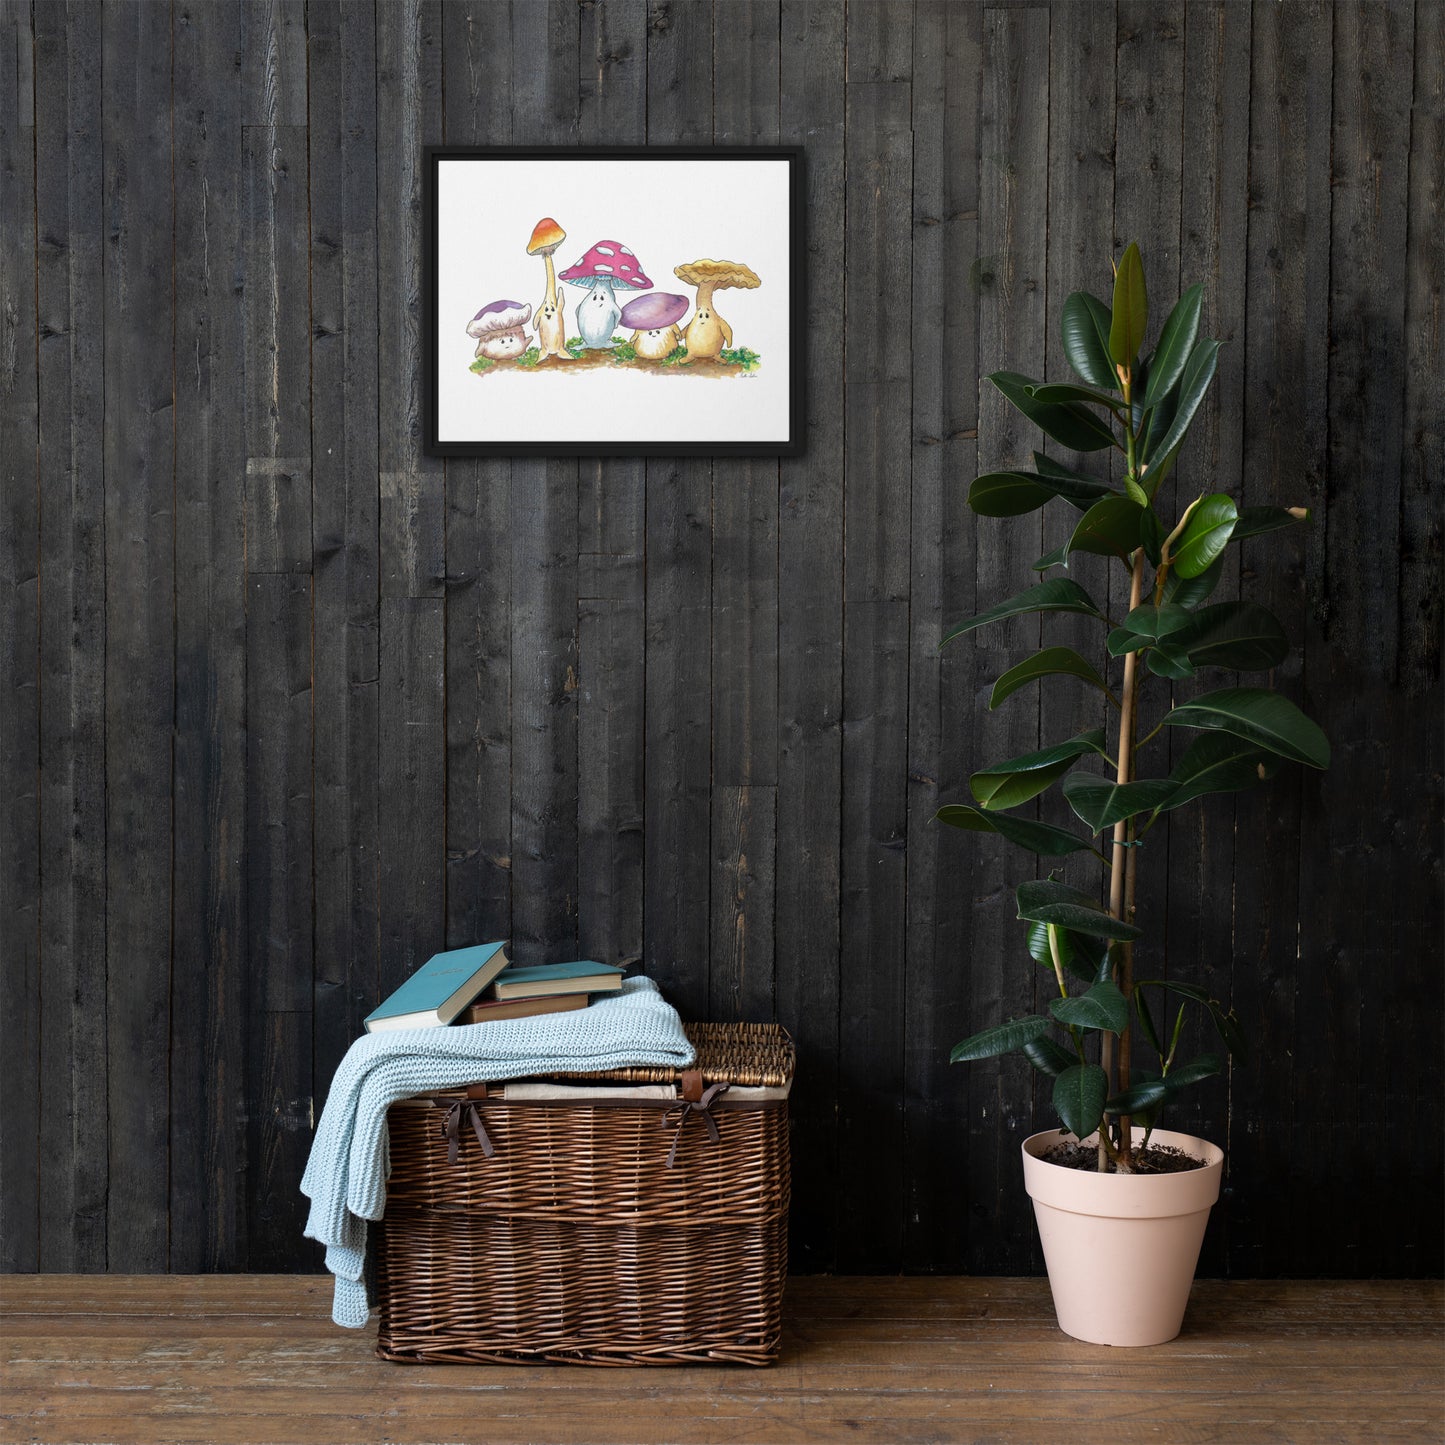 16 by 20 inch canvas print of Heather Silver's watercolor painting, Mushy and Friends. Framed in a black pine wood frame that gives it a floating canvas effect. Shown on wood wall above wicker basket and potted plant.